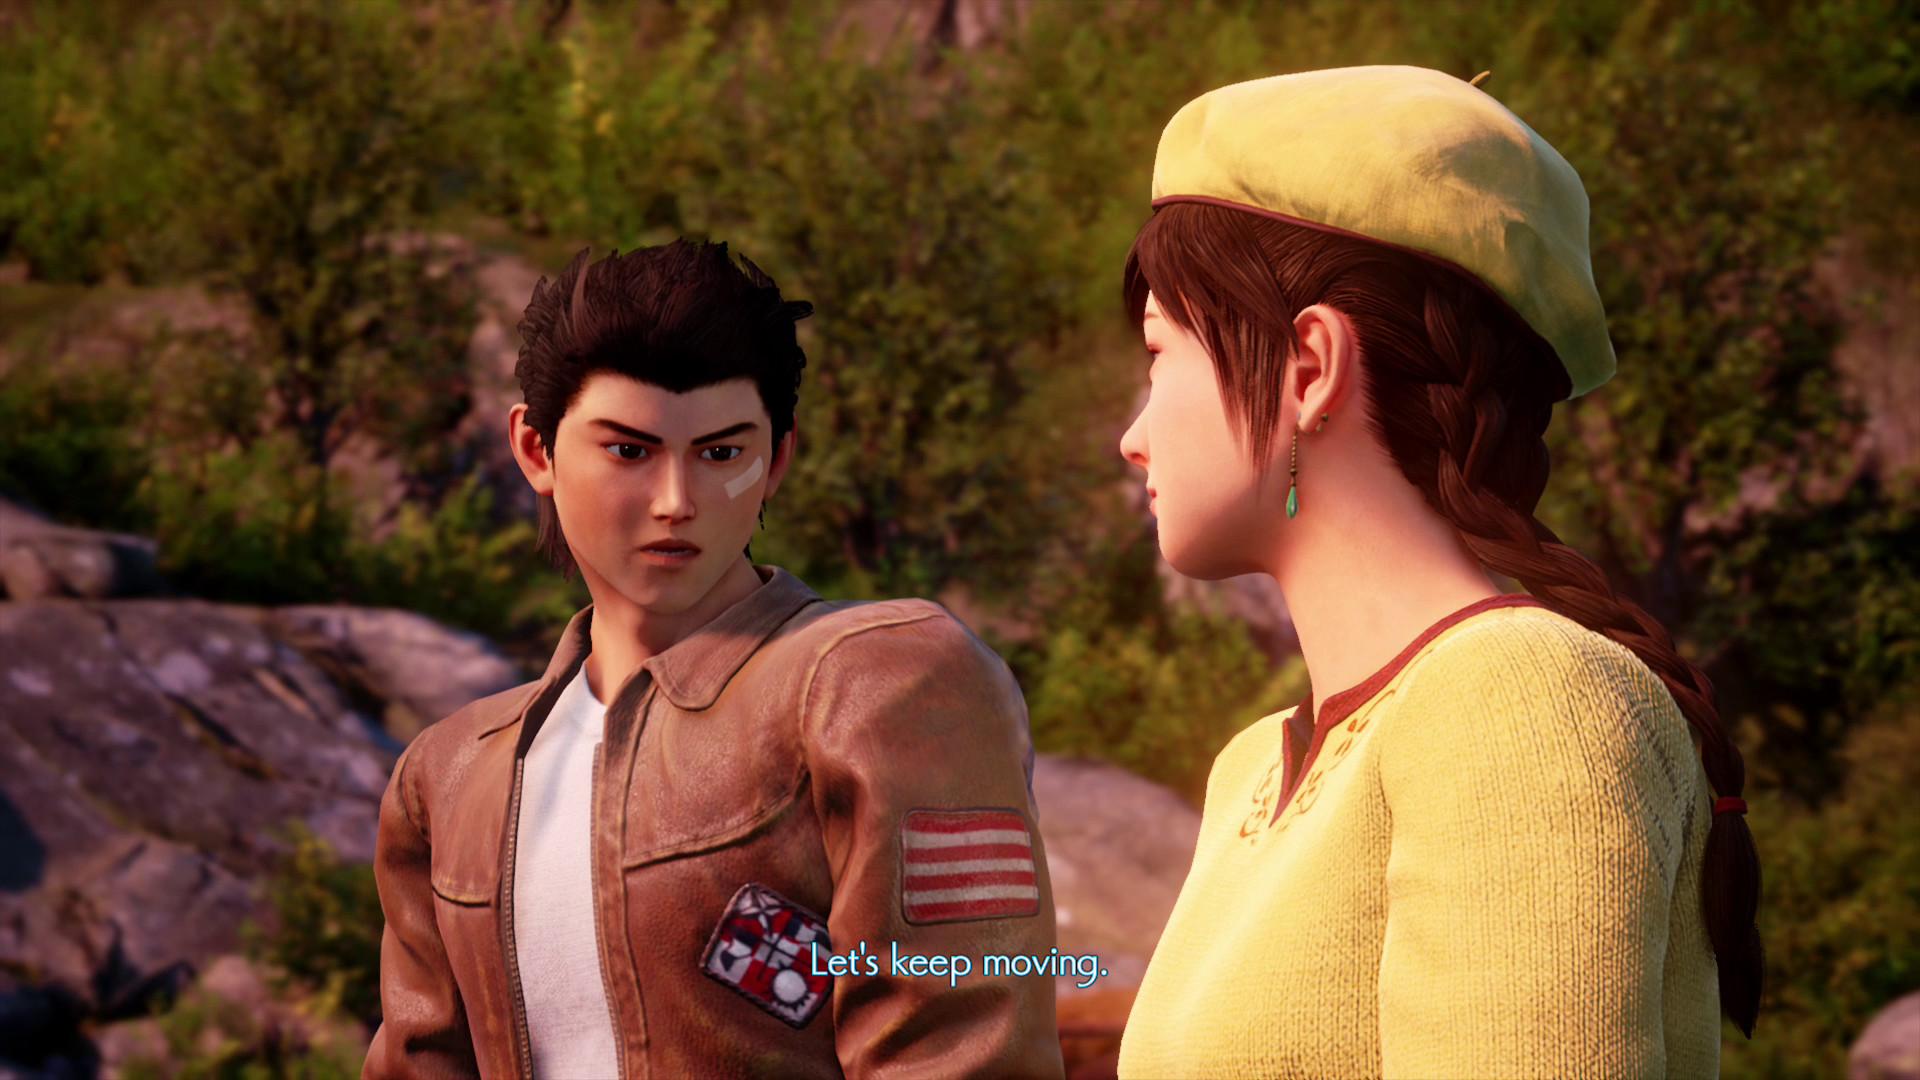 The Shenmue III Big Merry Cruise-Repack PC Direct Download [ Crack ]